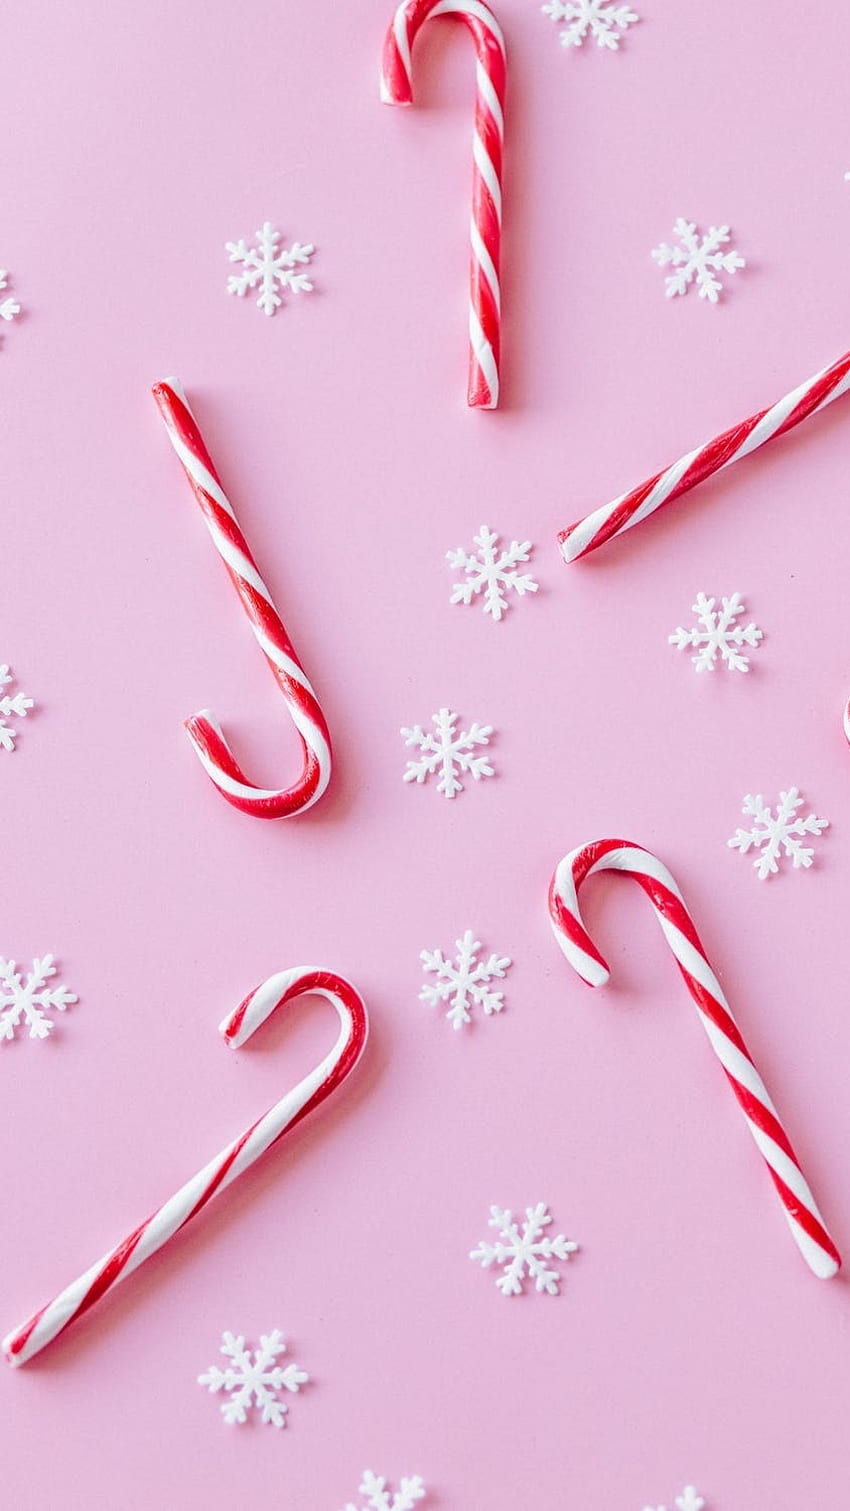 Candy canes and snowflakes on a pink background - Candy cane